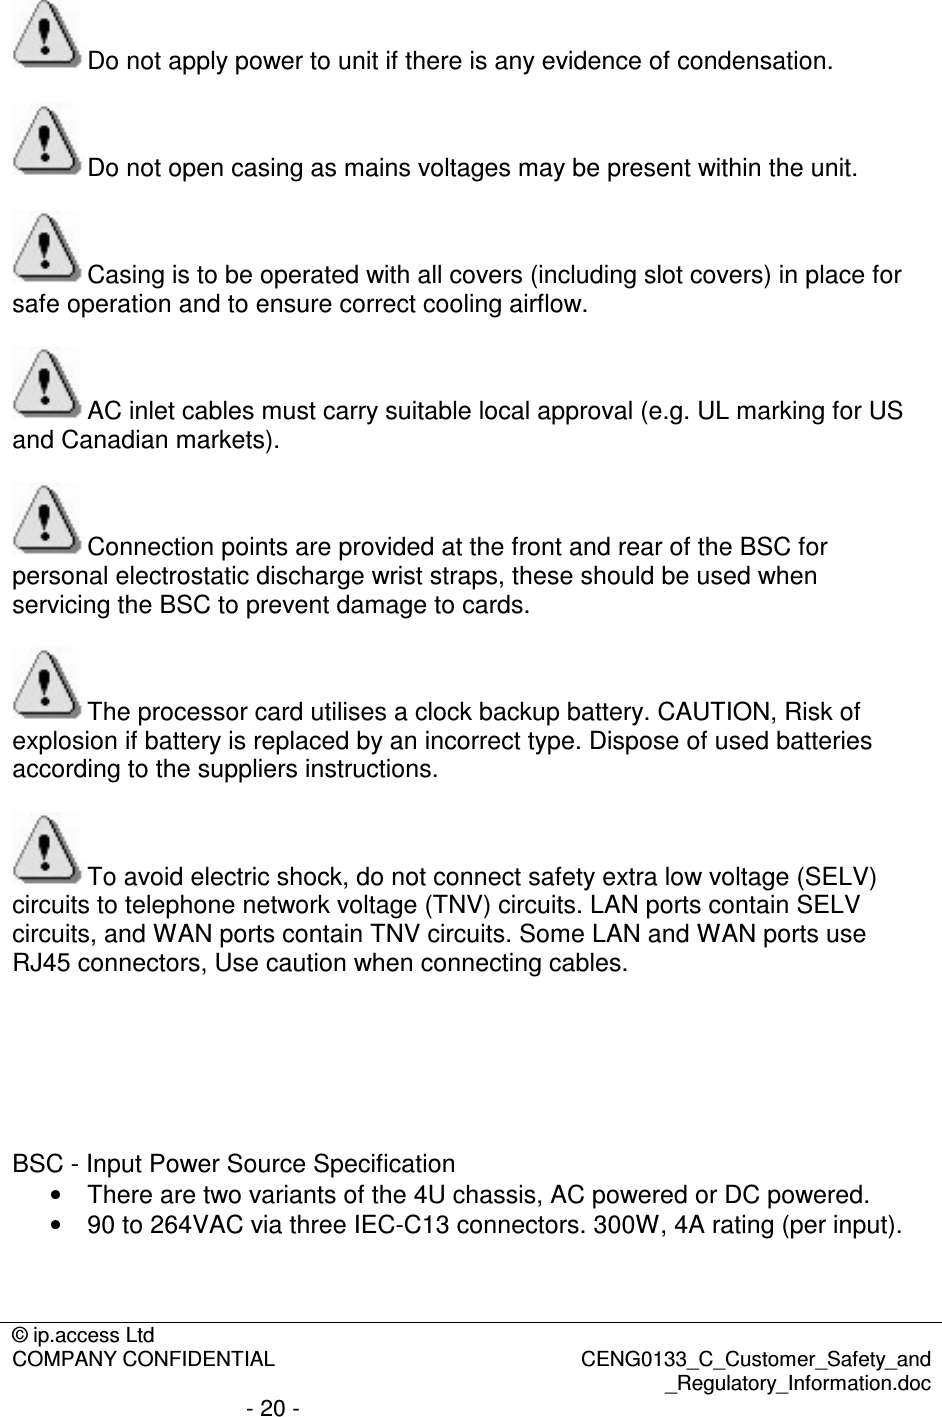 © ip.access Ltd  COMPANY CONFIDENTIAL  CENG0133_C_Customer_Safety_and _Regulatory_Information.doc - 20 -  Do not apply power to unit if there is any evidence of condensation.  Do not open casing as mains voltages may be present within the unit.  Casing is to be operated with all covers (including slot covers) in place for safe operation and to ensure correct cooling airflow.  AC inlet cables must carry suitable local approval (e.g. UL marking for US and Canadian markets).  Connection points are provided at the front and rear of the BSC for personal electrostatic discharge wrist straps, these should be used when servicing the BSC to prevent damage to cards.  The processor card utilises a clock backup battery. CAUTION, Risk of explosion if battery is replaced by an incorrect type. Dispose of used batteries according to the suppliers instructions.  To avoid electric shock, do not connect safety extra low voltage (SELV) circuits to telephone network voltage (TNV) circuits. LAN ports contain SELV circuits, and WAN ports contain TNV circuits. Some LAN and WAN ports use RJ45 connectors, Use caution when connecting cables.       BSC - Input Power Source Specification •  There are two variants of the 4U chassis, AC powered or DC powered. •  90 to 264VAC via three IEC-C13 connectors. 300W, 4A rating (per input). 